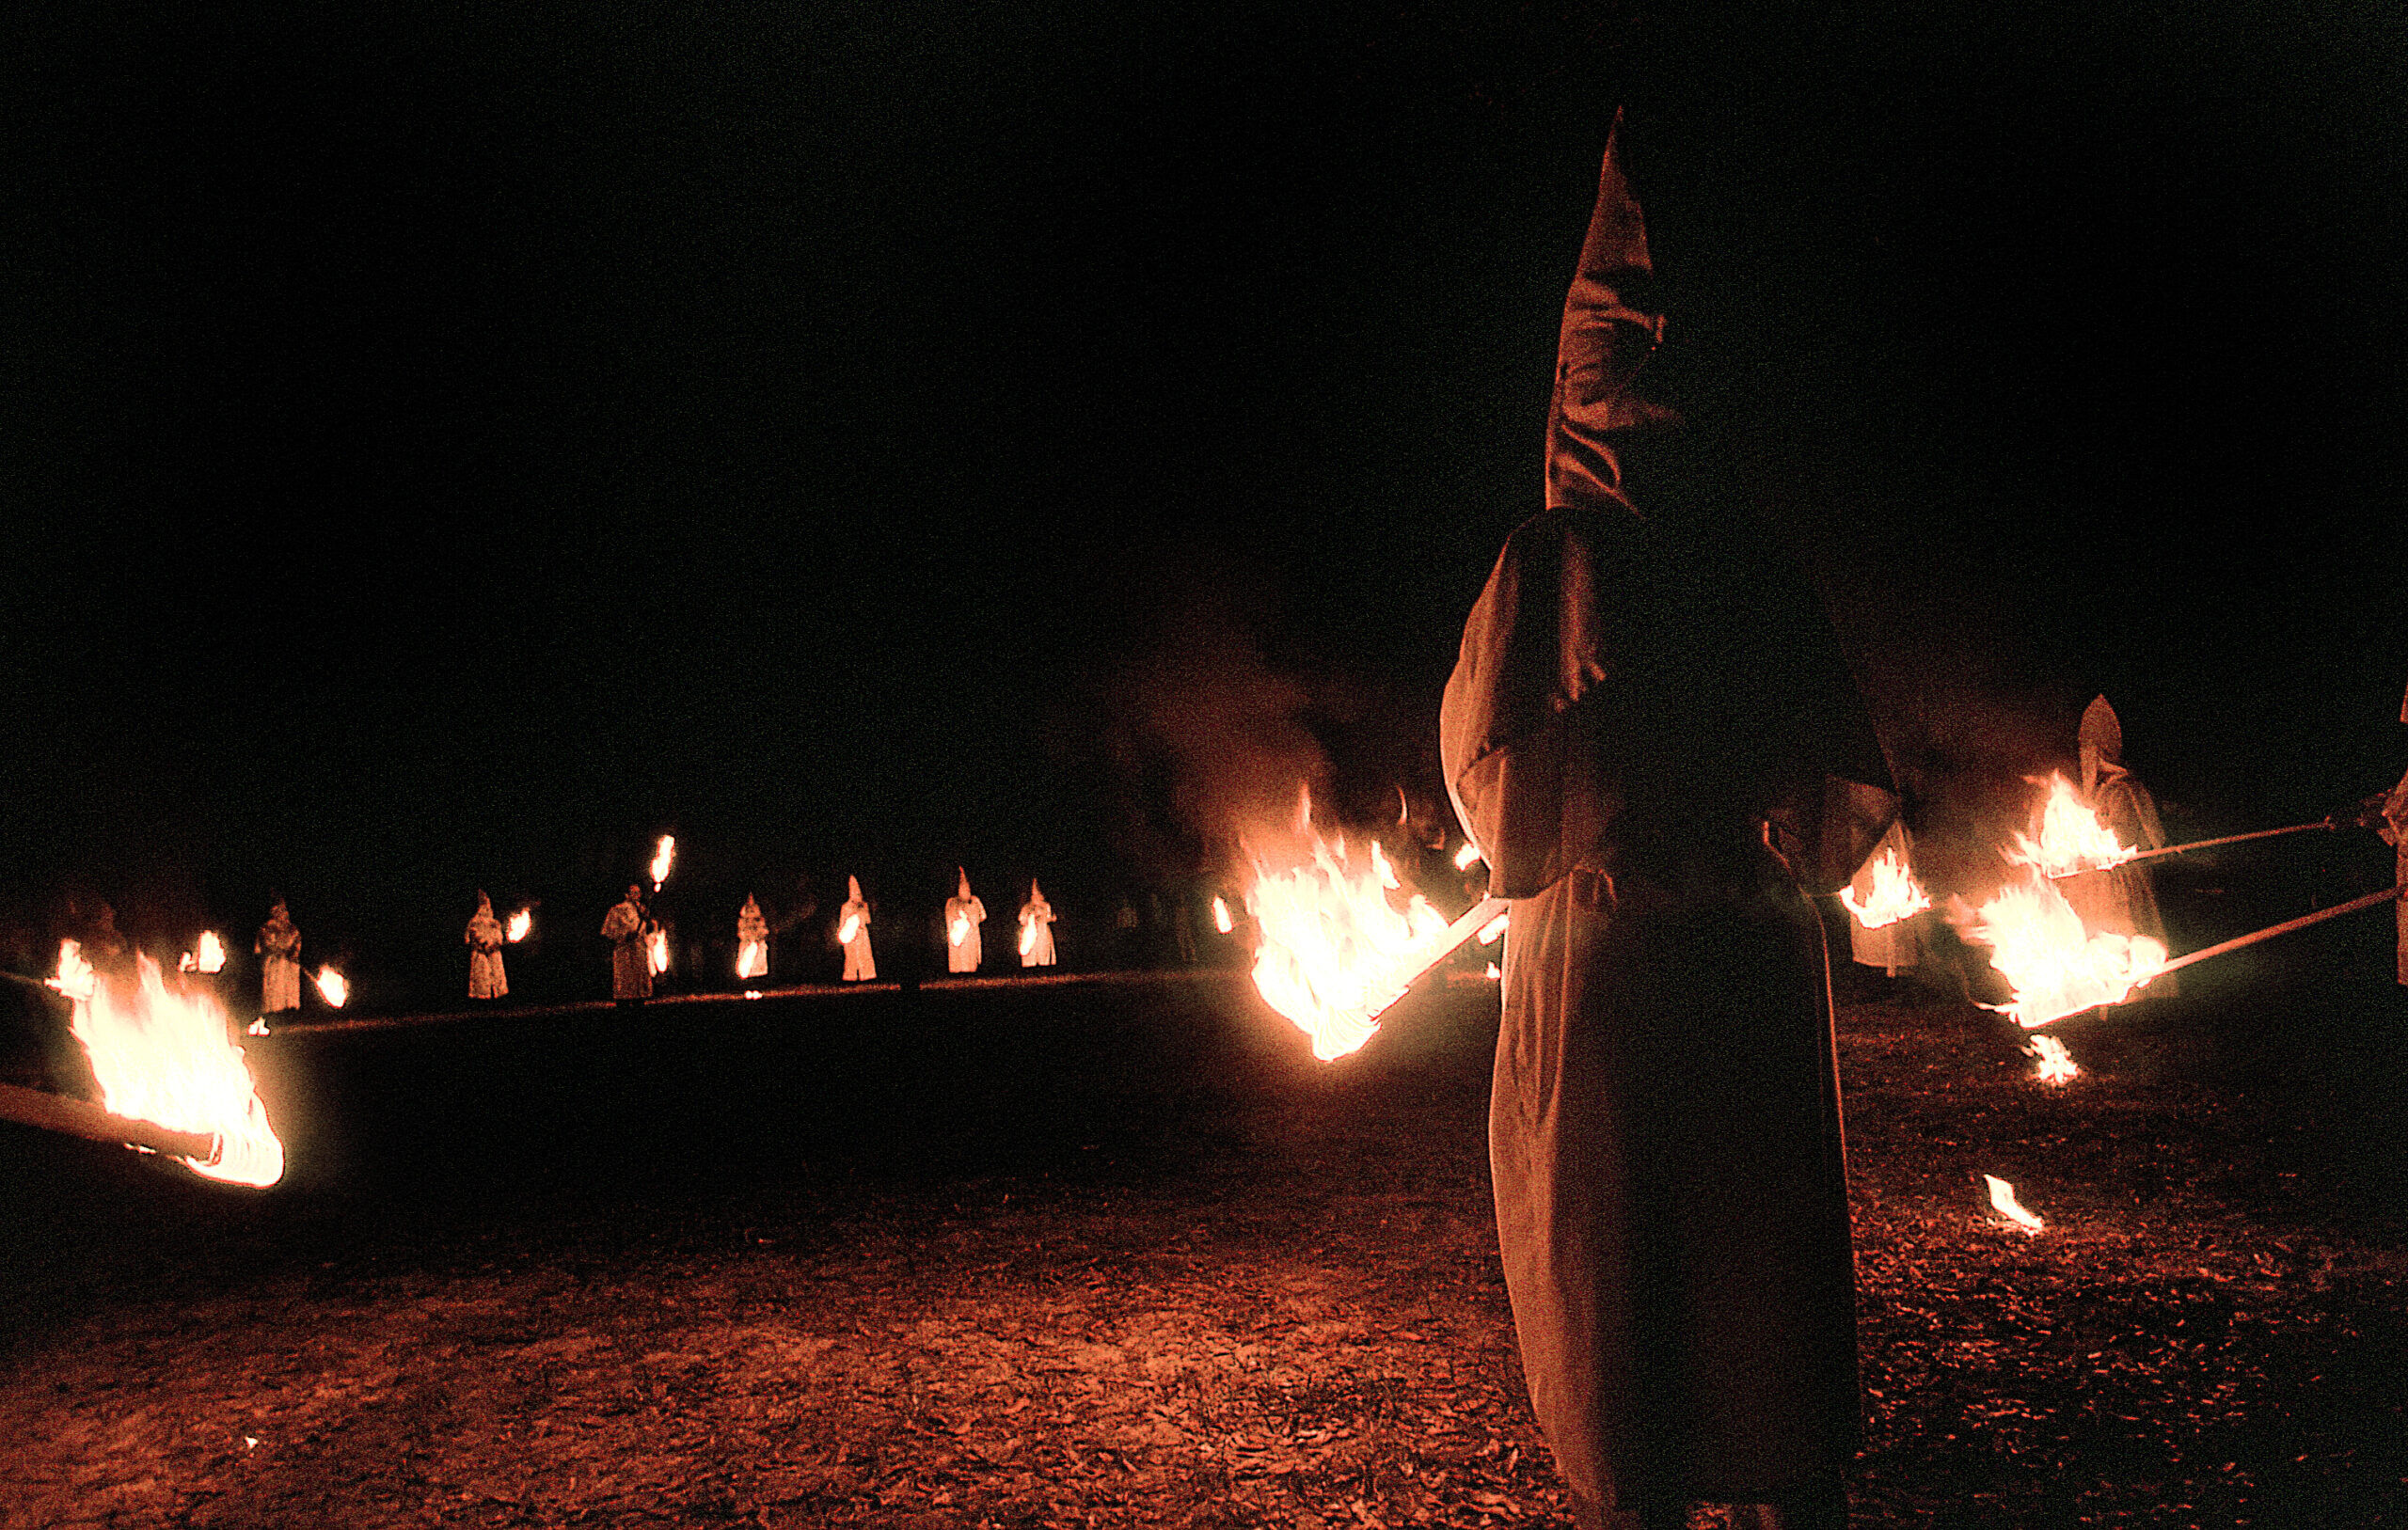 Panhandle, Florida, United States - circa 1995 - Ku Klux Klan KKK Night Ceremony, Members Wearing White Robes, Hoods and Carrying Burning Torches, Standing in a Circle